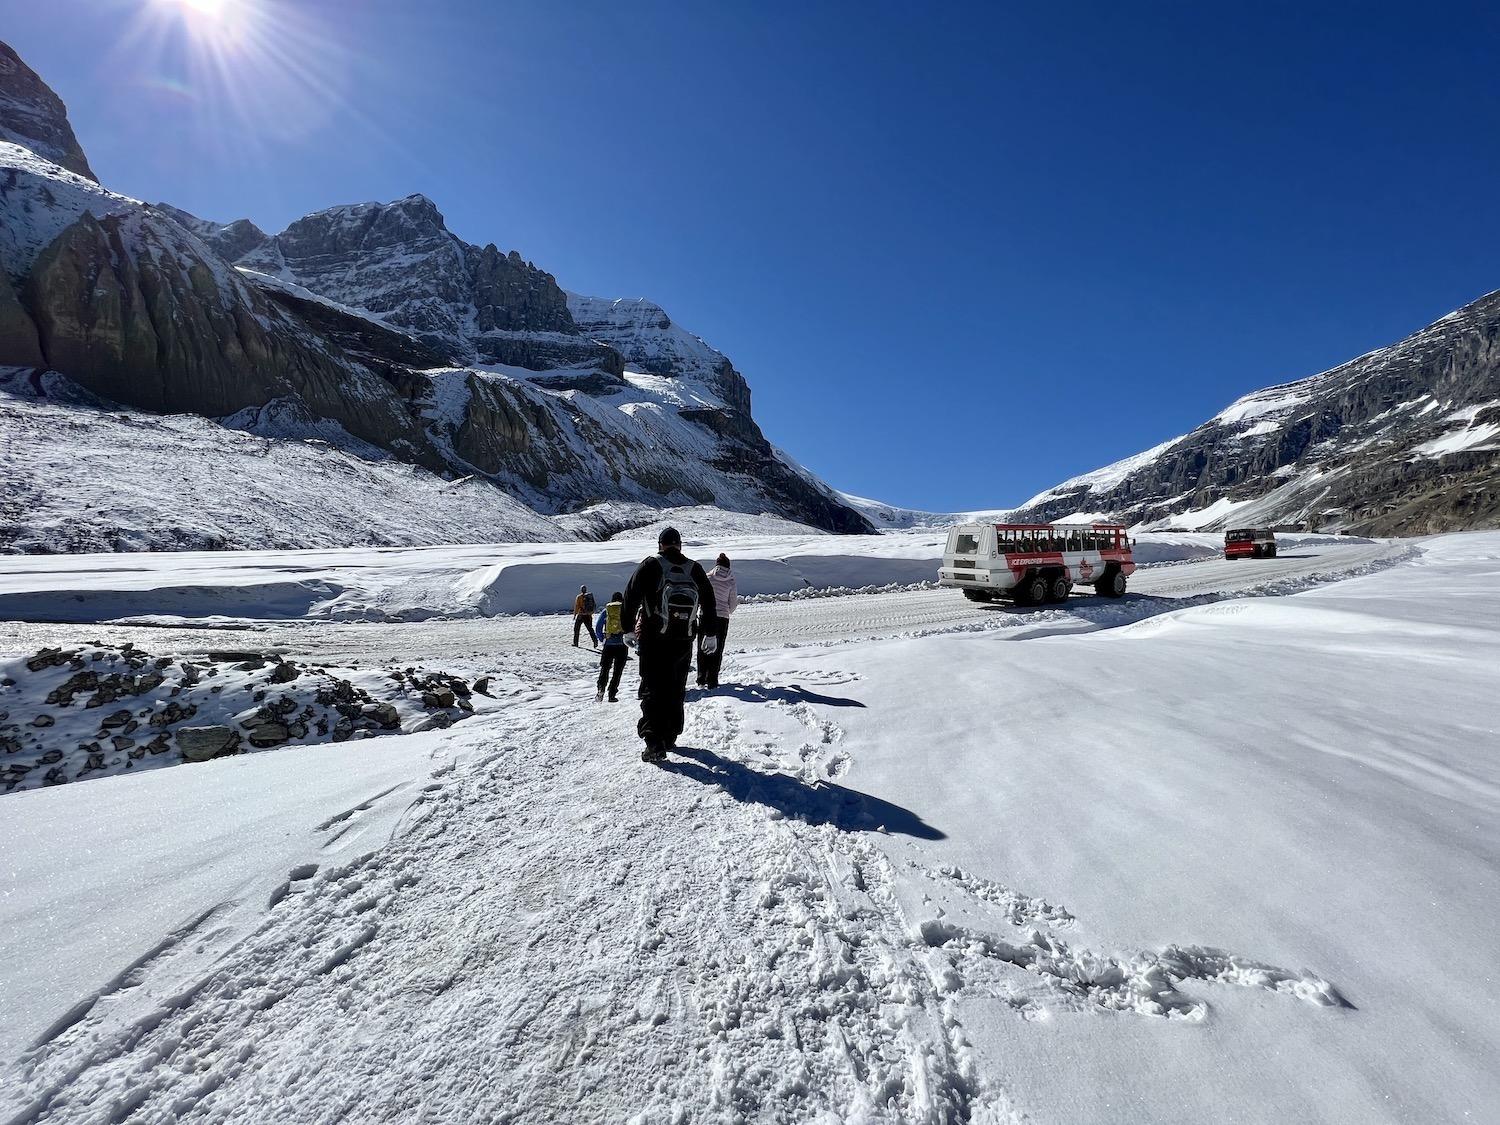 Our group crosses an ice road as snow coaches ferry other visitors to the Athabasca Glacier.